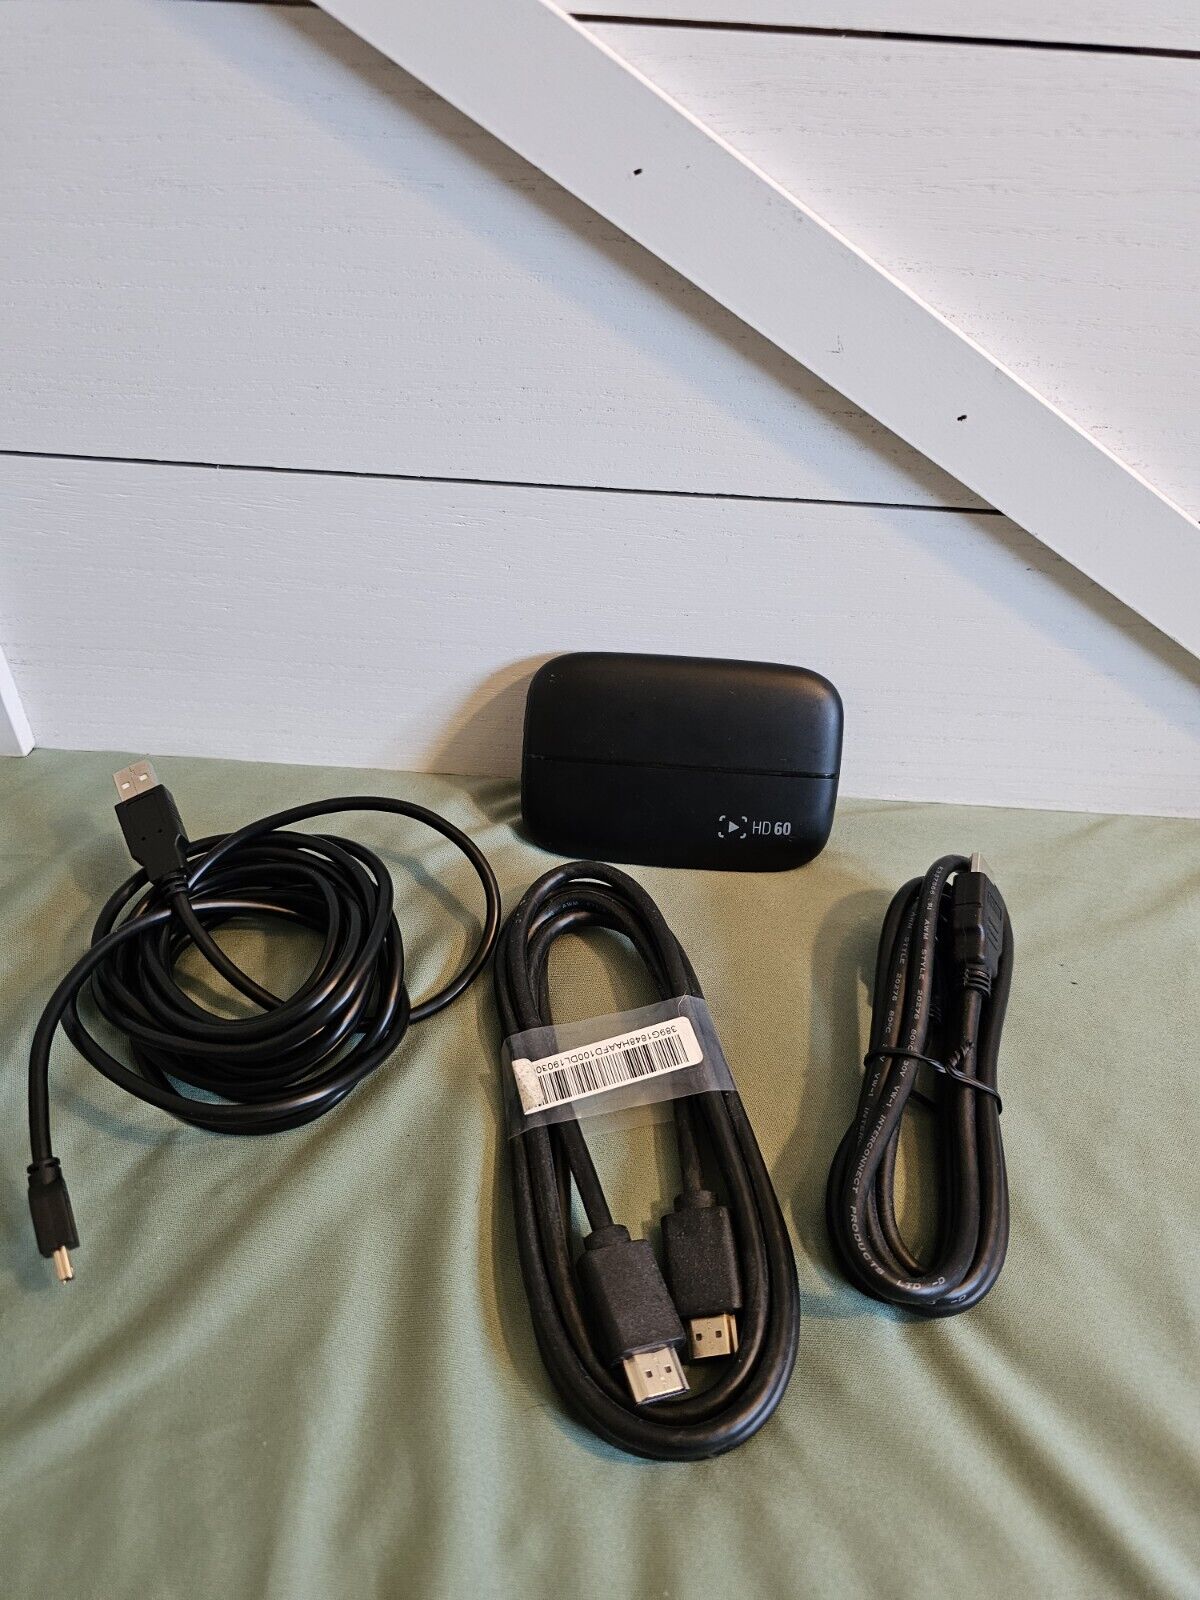 Elgato HD60 Game Capture Recorder + Cables *Lightly Used*